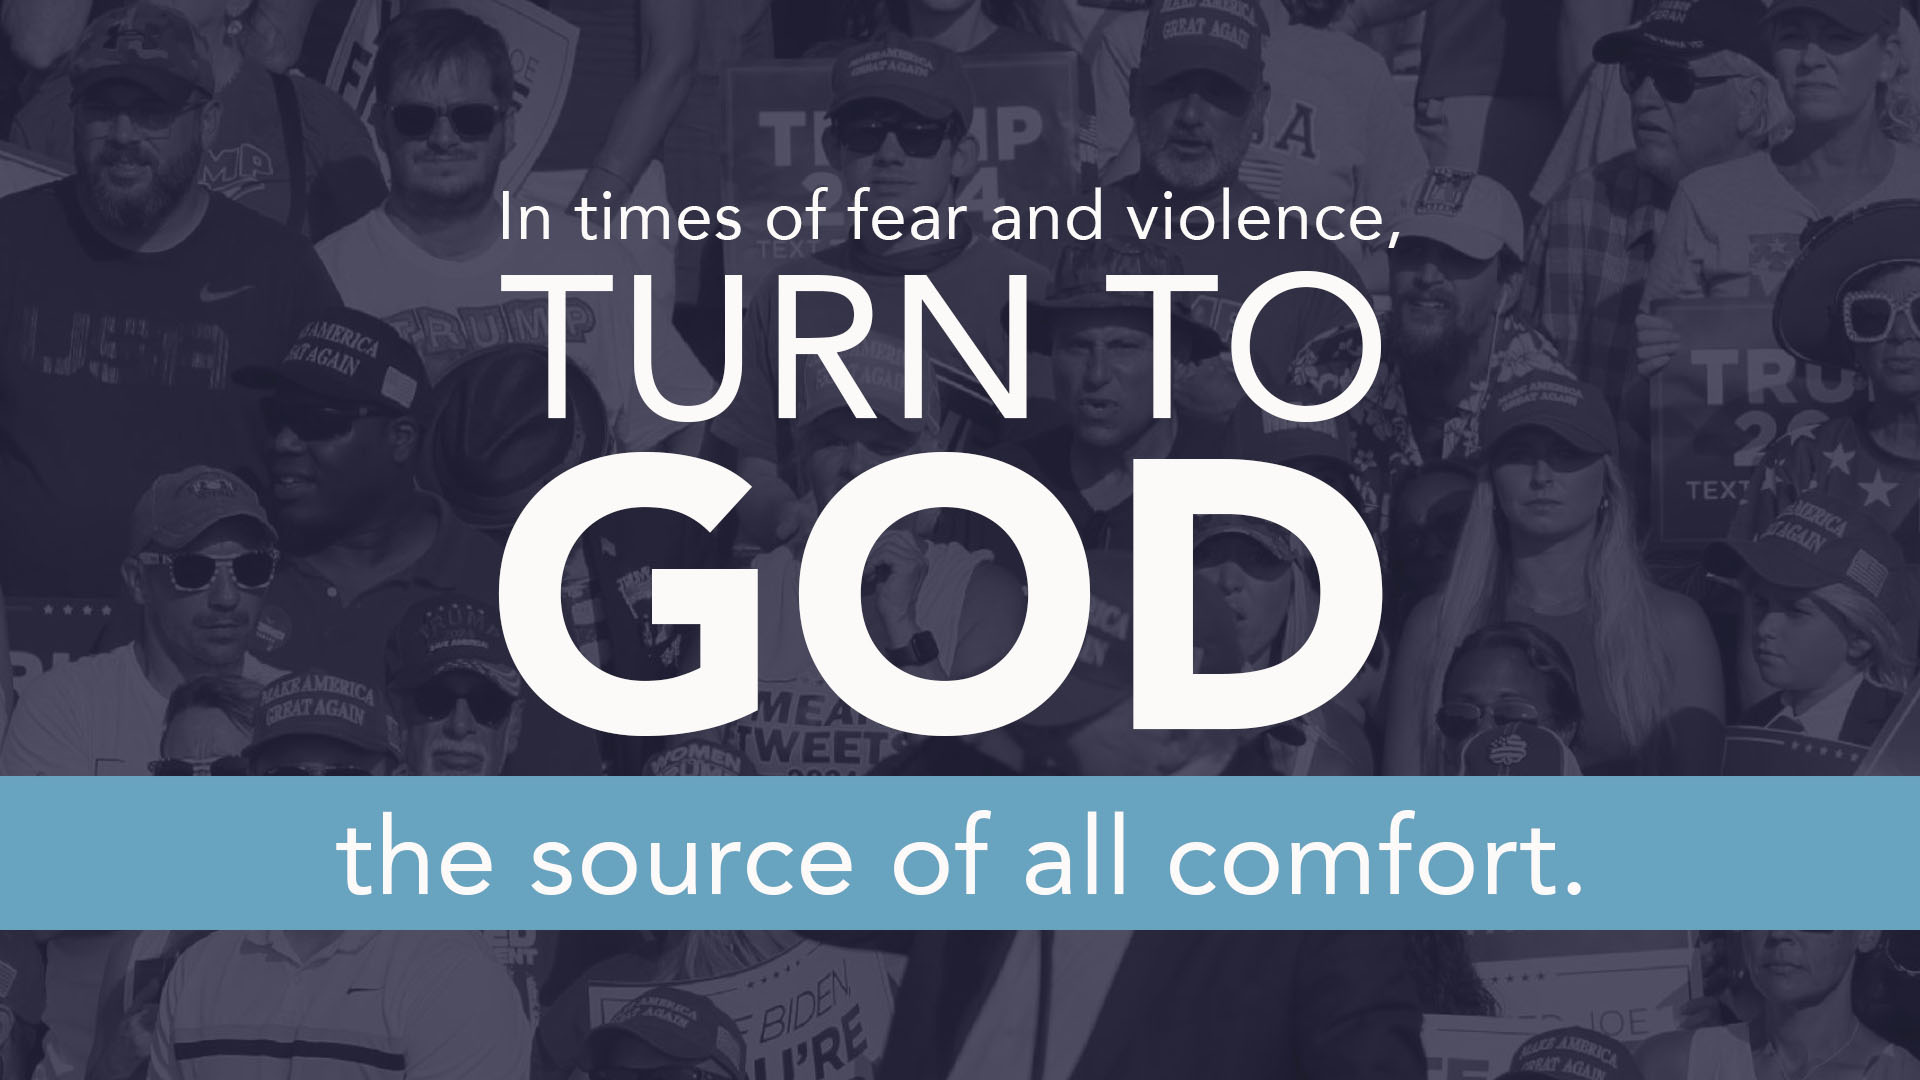 In times of fear and violence, turn to God, the source of all comfort.